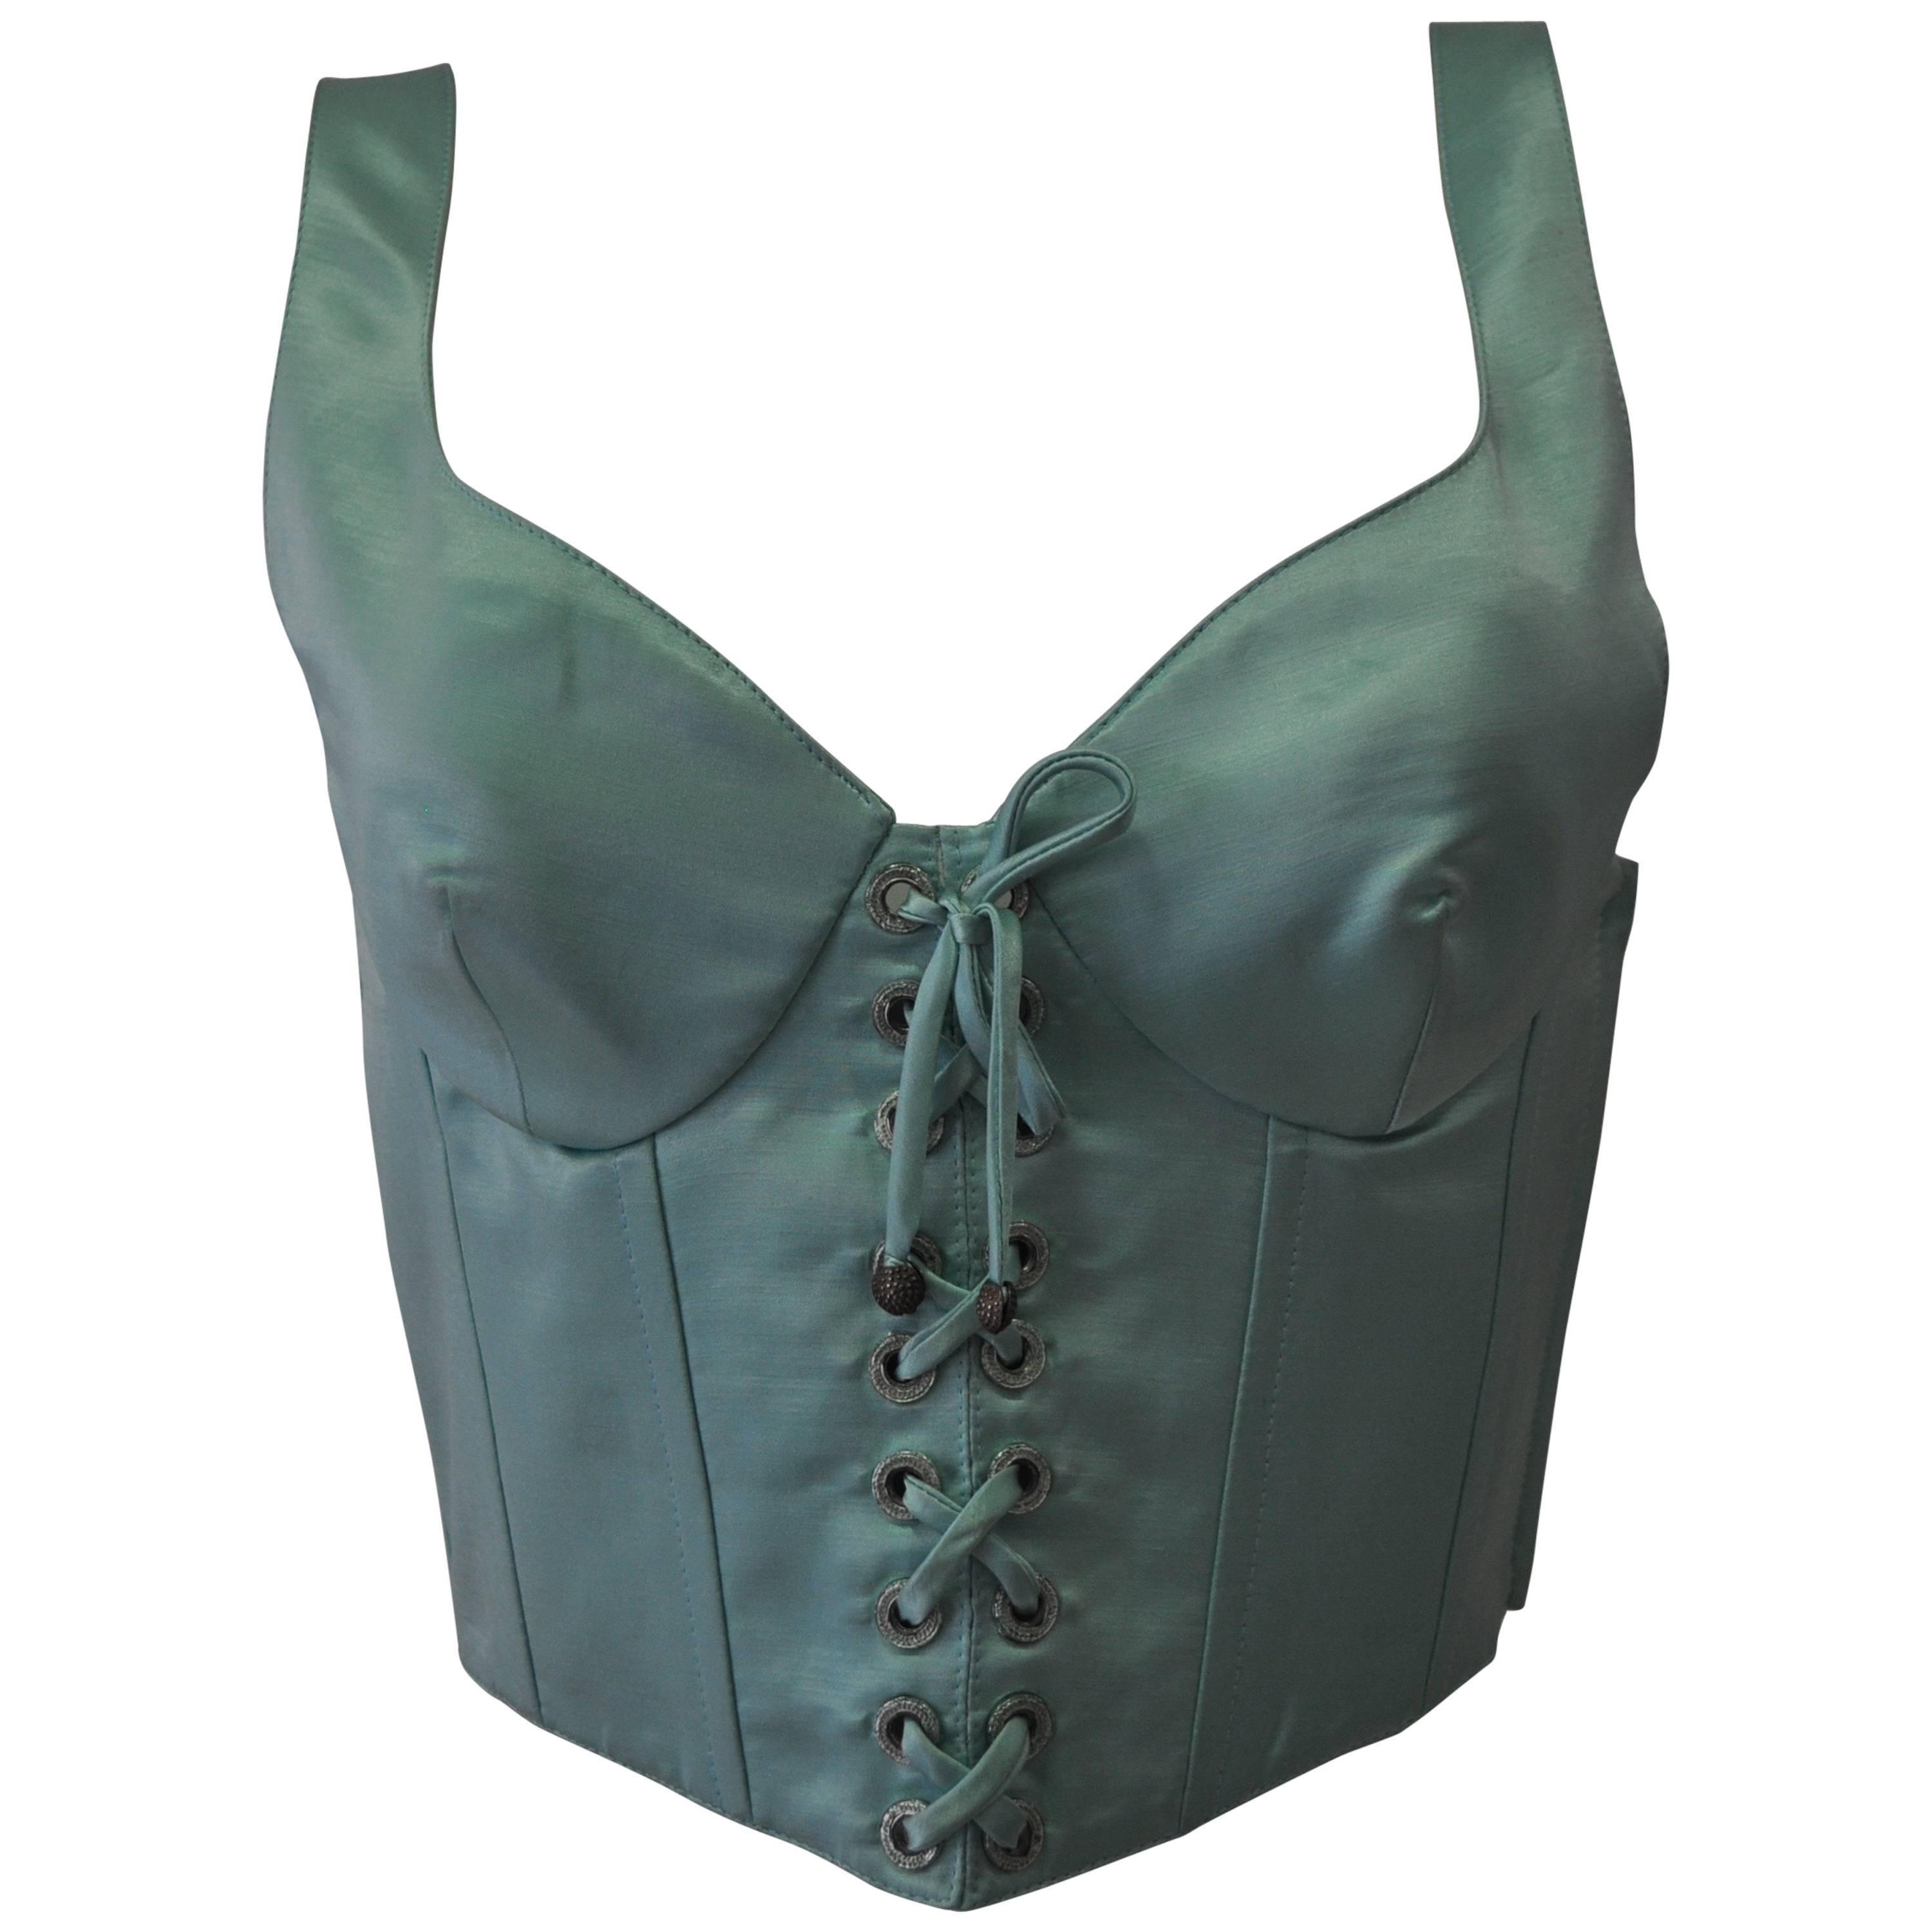 Iconic Gianni Versace Istante Mint Green Bustier